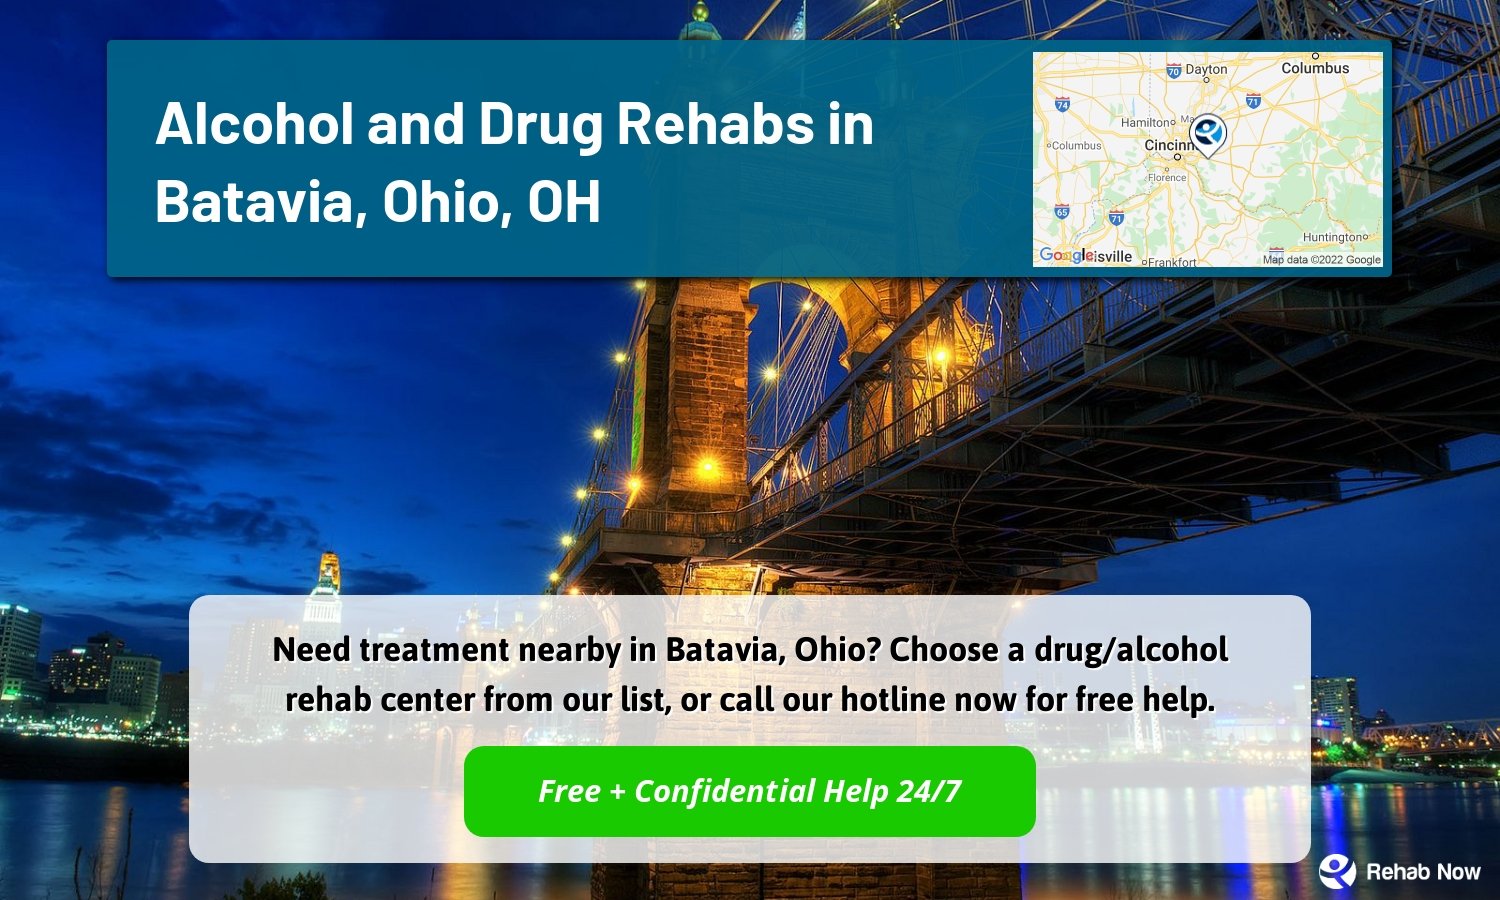 Need treatment nearby in Batavia, Ohio? Choose a drug/alcohol rehab center from our list, or call our hotline now for free help.